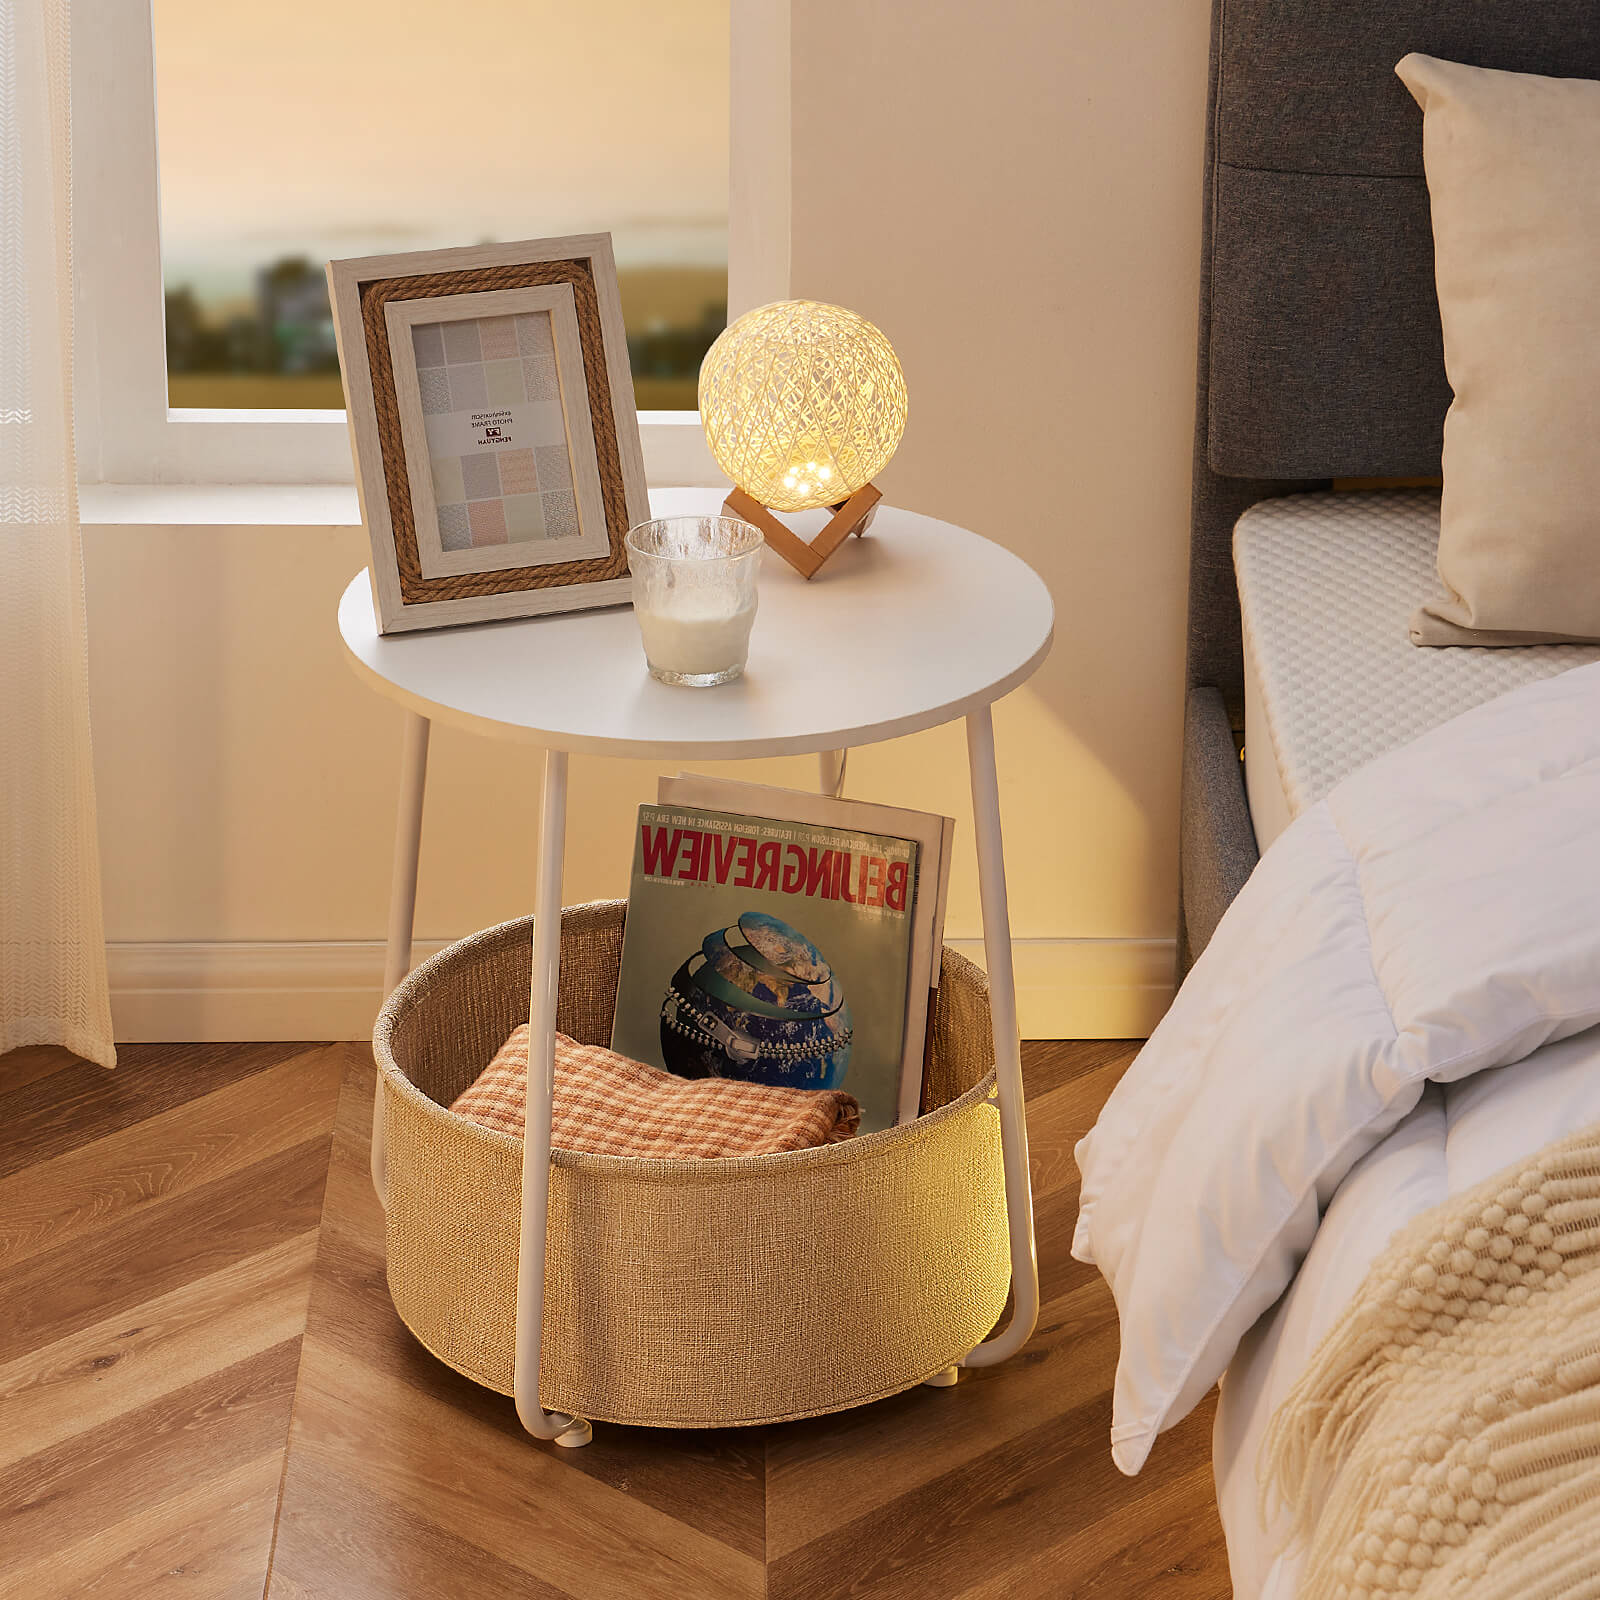 Compact nightstand, sofa side table, can be used in living room, nursery room, bedroom, comes with fabric basket for easy storage